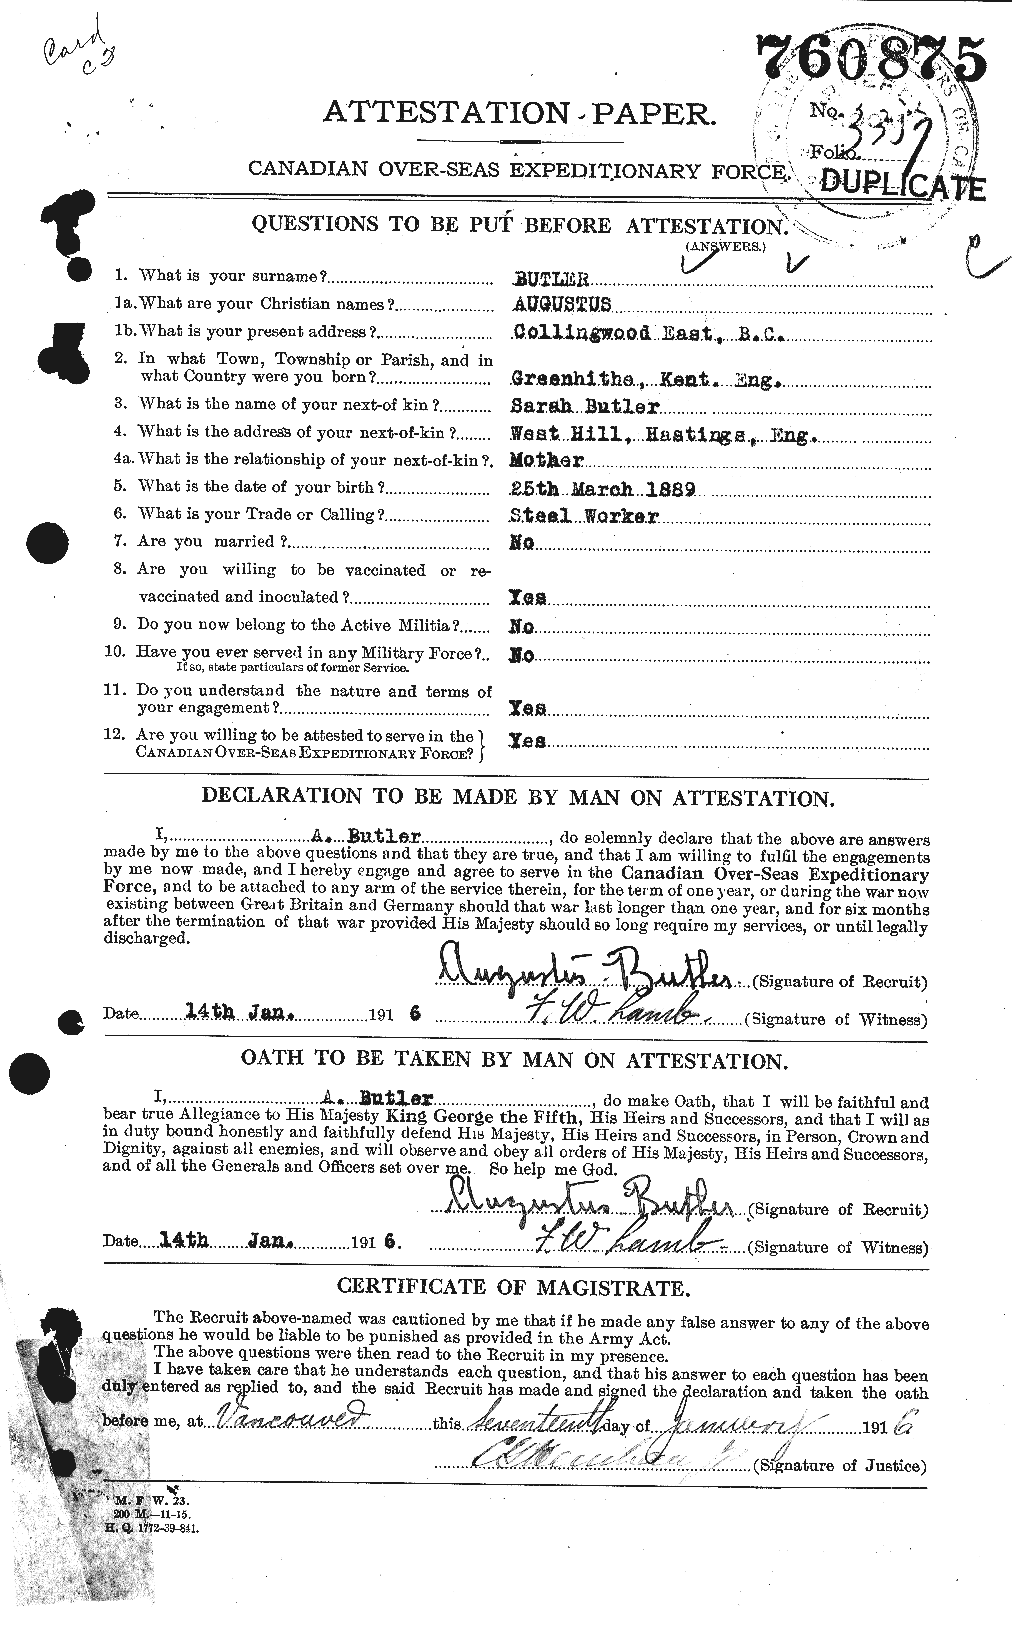 Personnel Records of the First World War - CEF 275802a